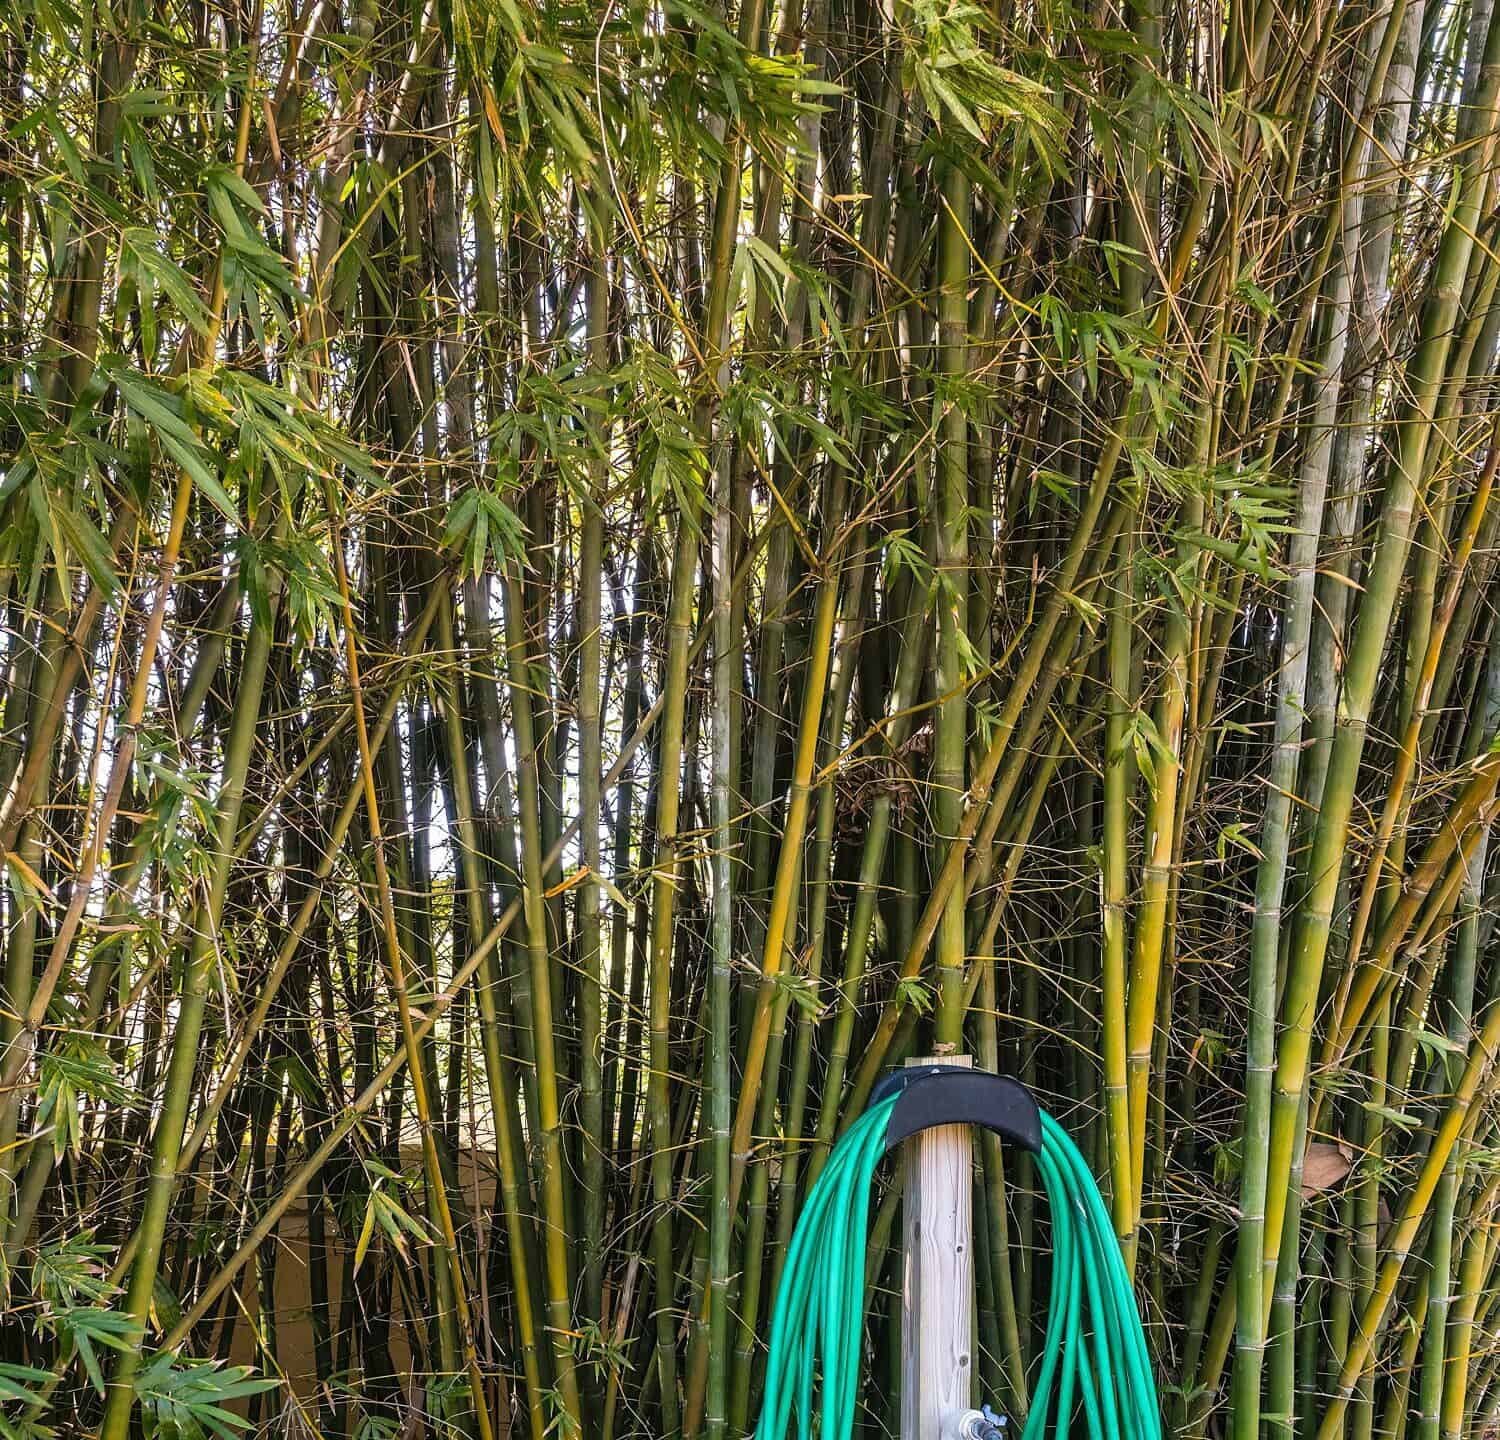 Garden hose coiled around pipe with water faucet by a tall hedge of seabreeze bamboo (binomial name: Bambusa malingensis) in an ornamental garden in southwest Florida. Foreground focus.